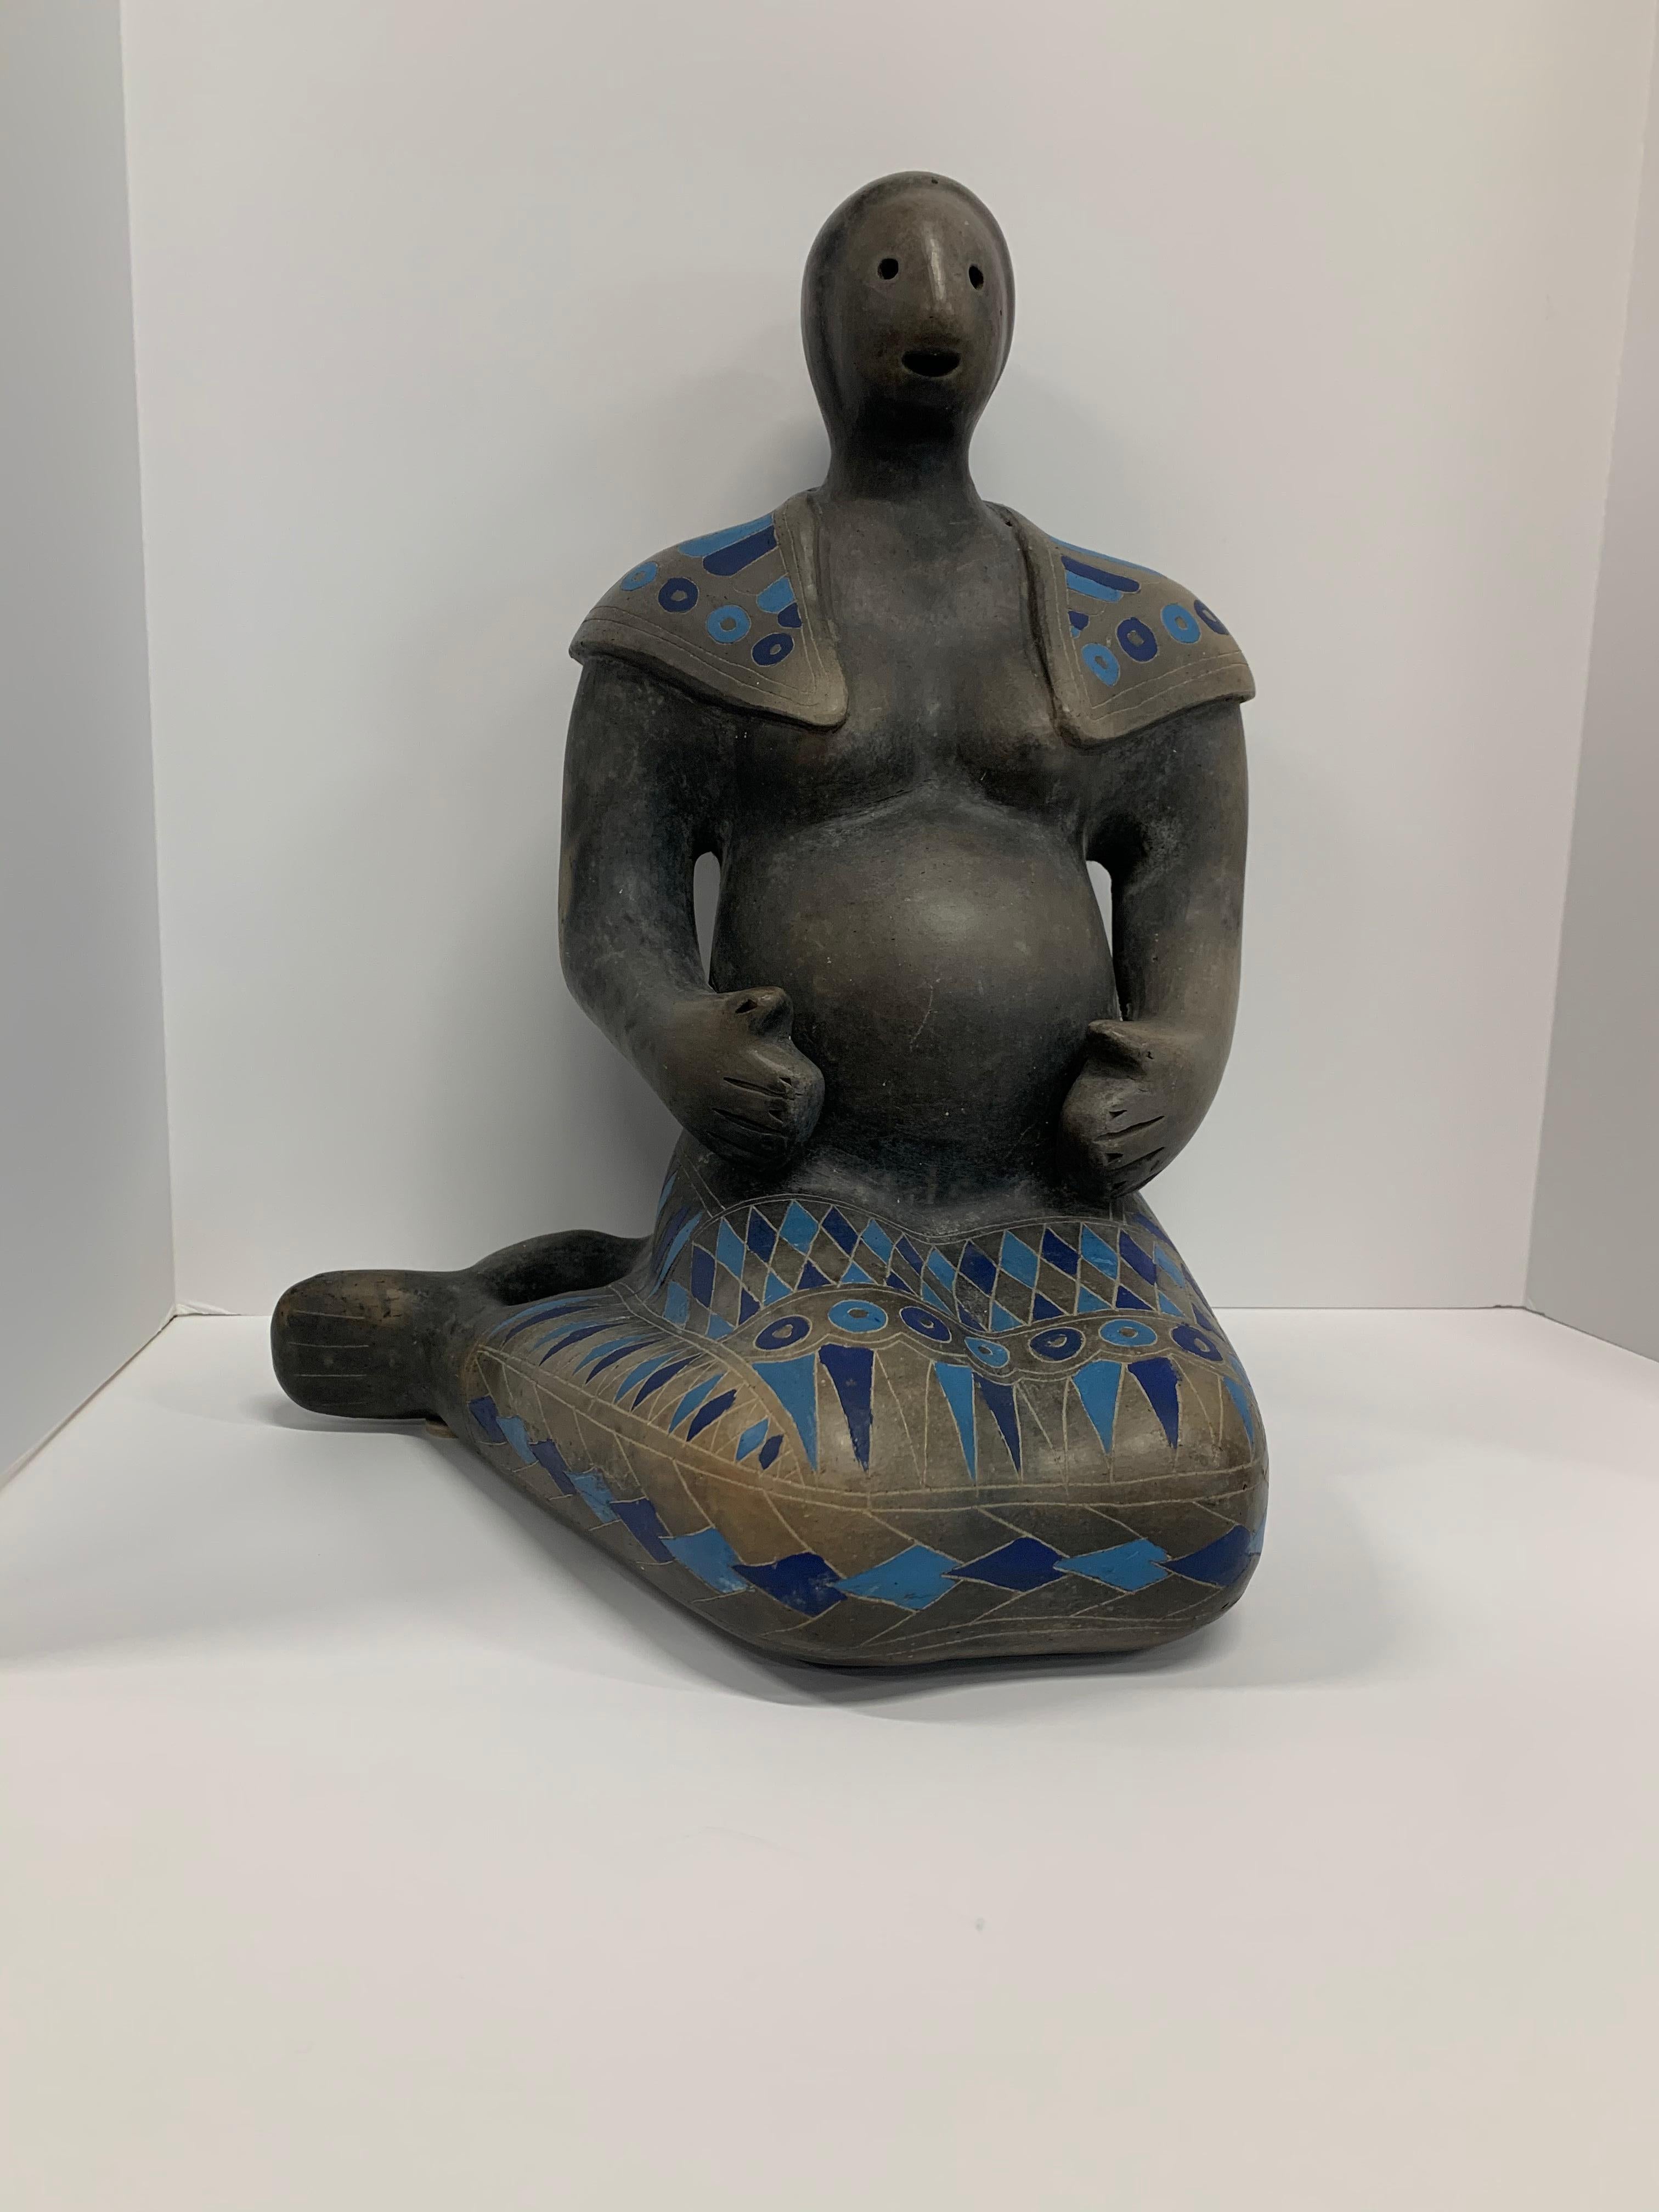 A feritilty figure likely by Max Kerlow from Teotihuacan in Mexico. Depicting a pregnant woman decorated in bright blue triangles. In good condition with minor flaws. Approximately 14 1/2 inches tall.